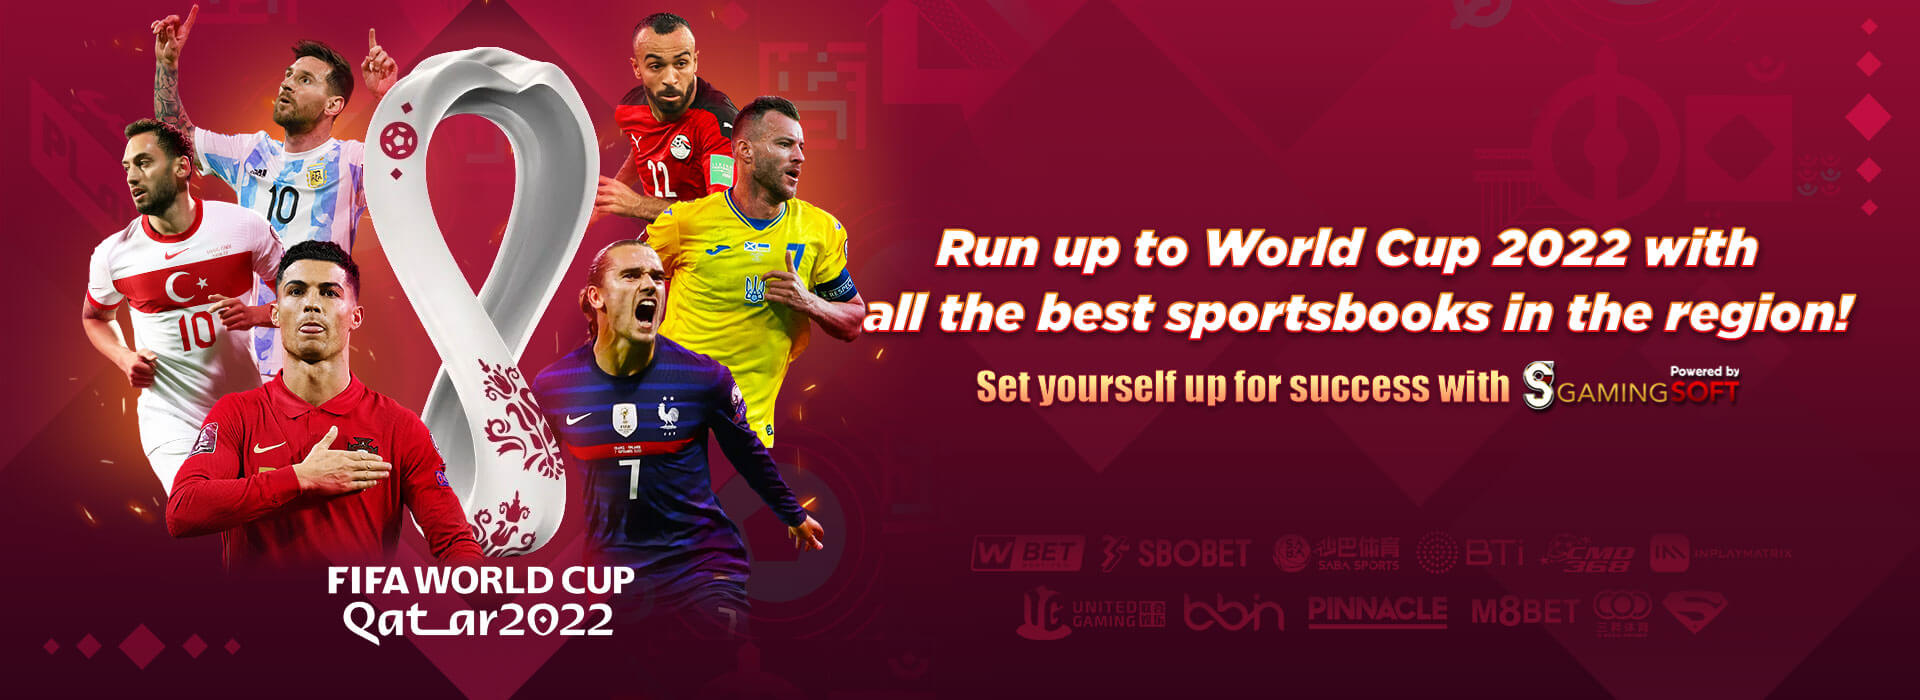 Run up to World Cup 2022 with all the best sportsbooks in the region Web Banner - GamingSoft